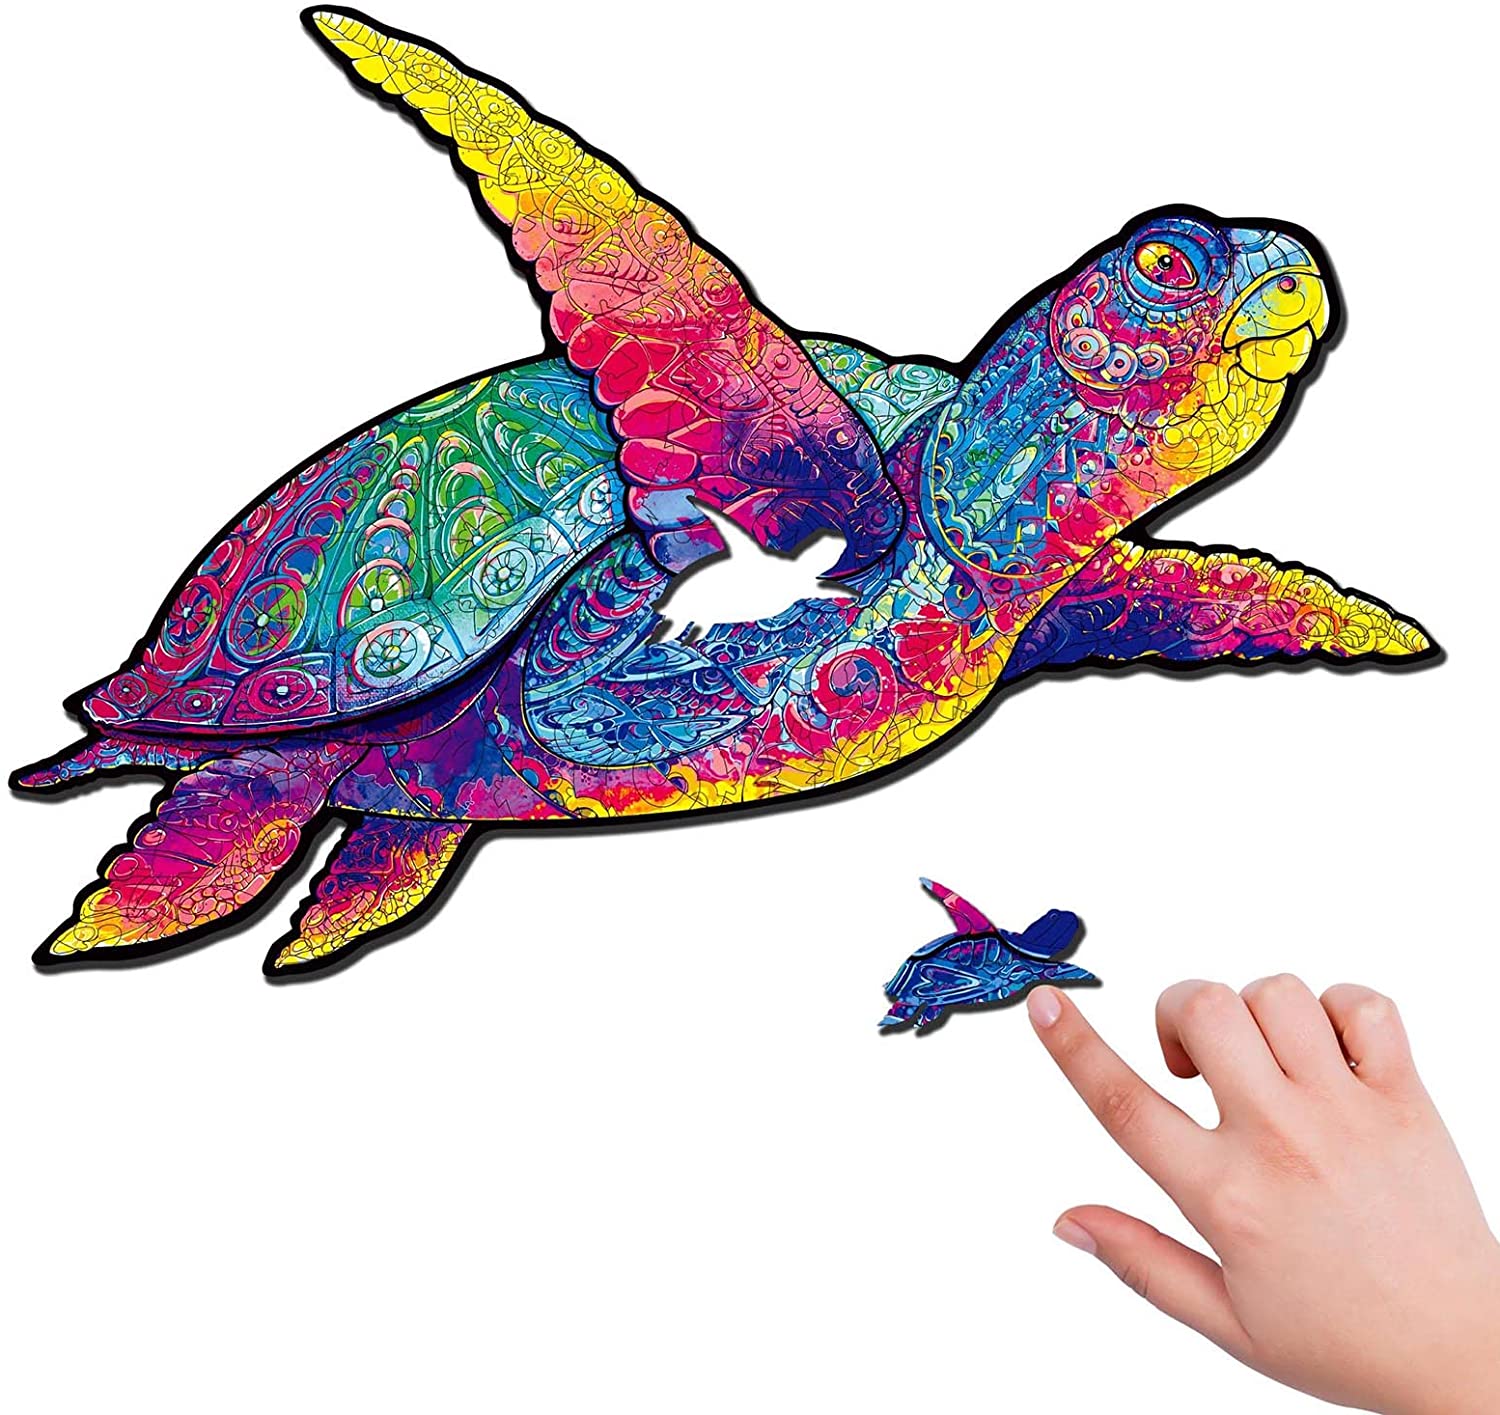 Sea Turtle Wooden Animal Puzzle Jigsaw Mosaic Puzzle Gift For Holiday 